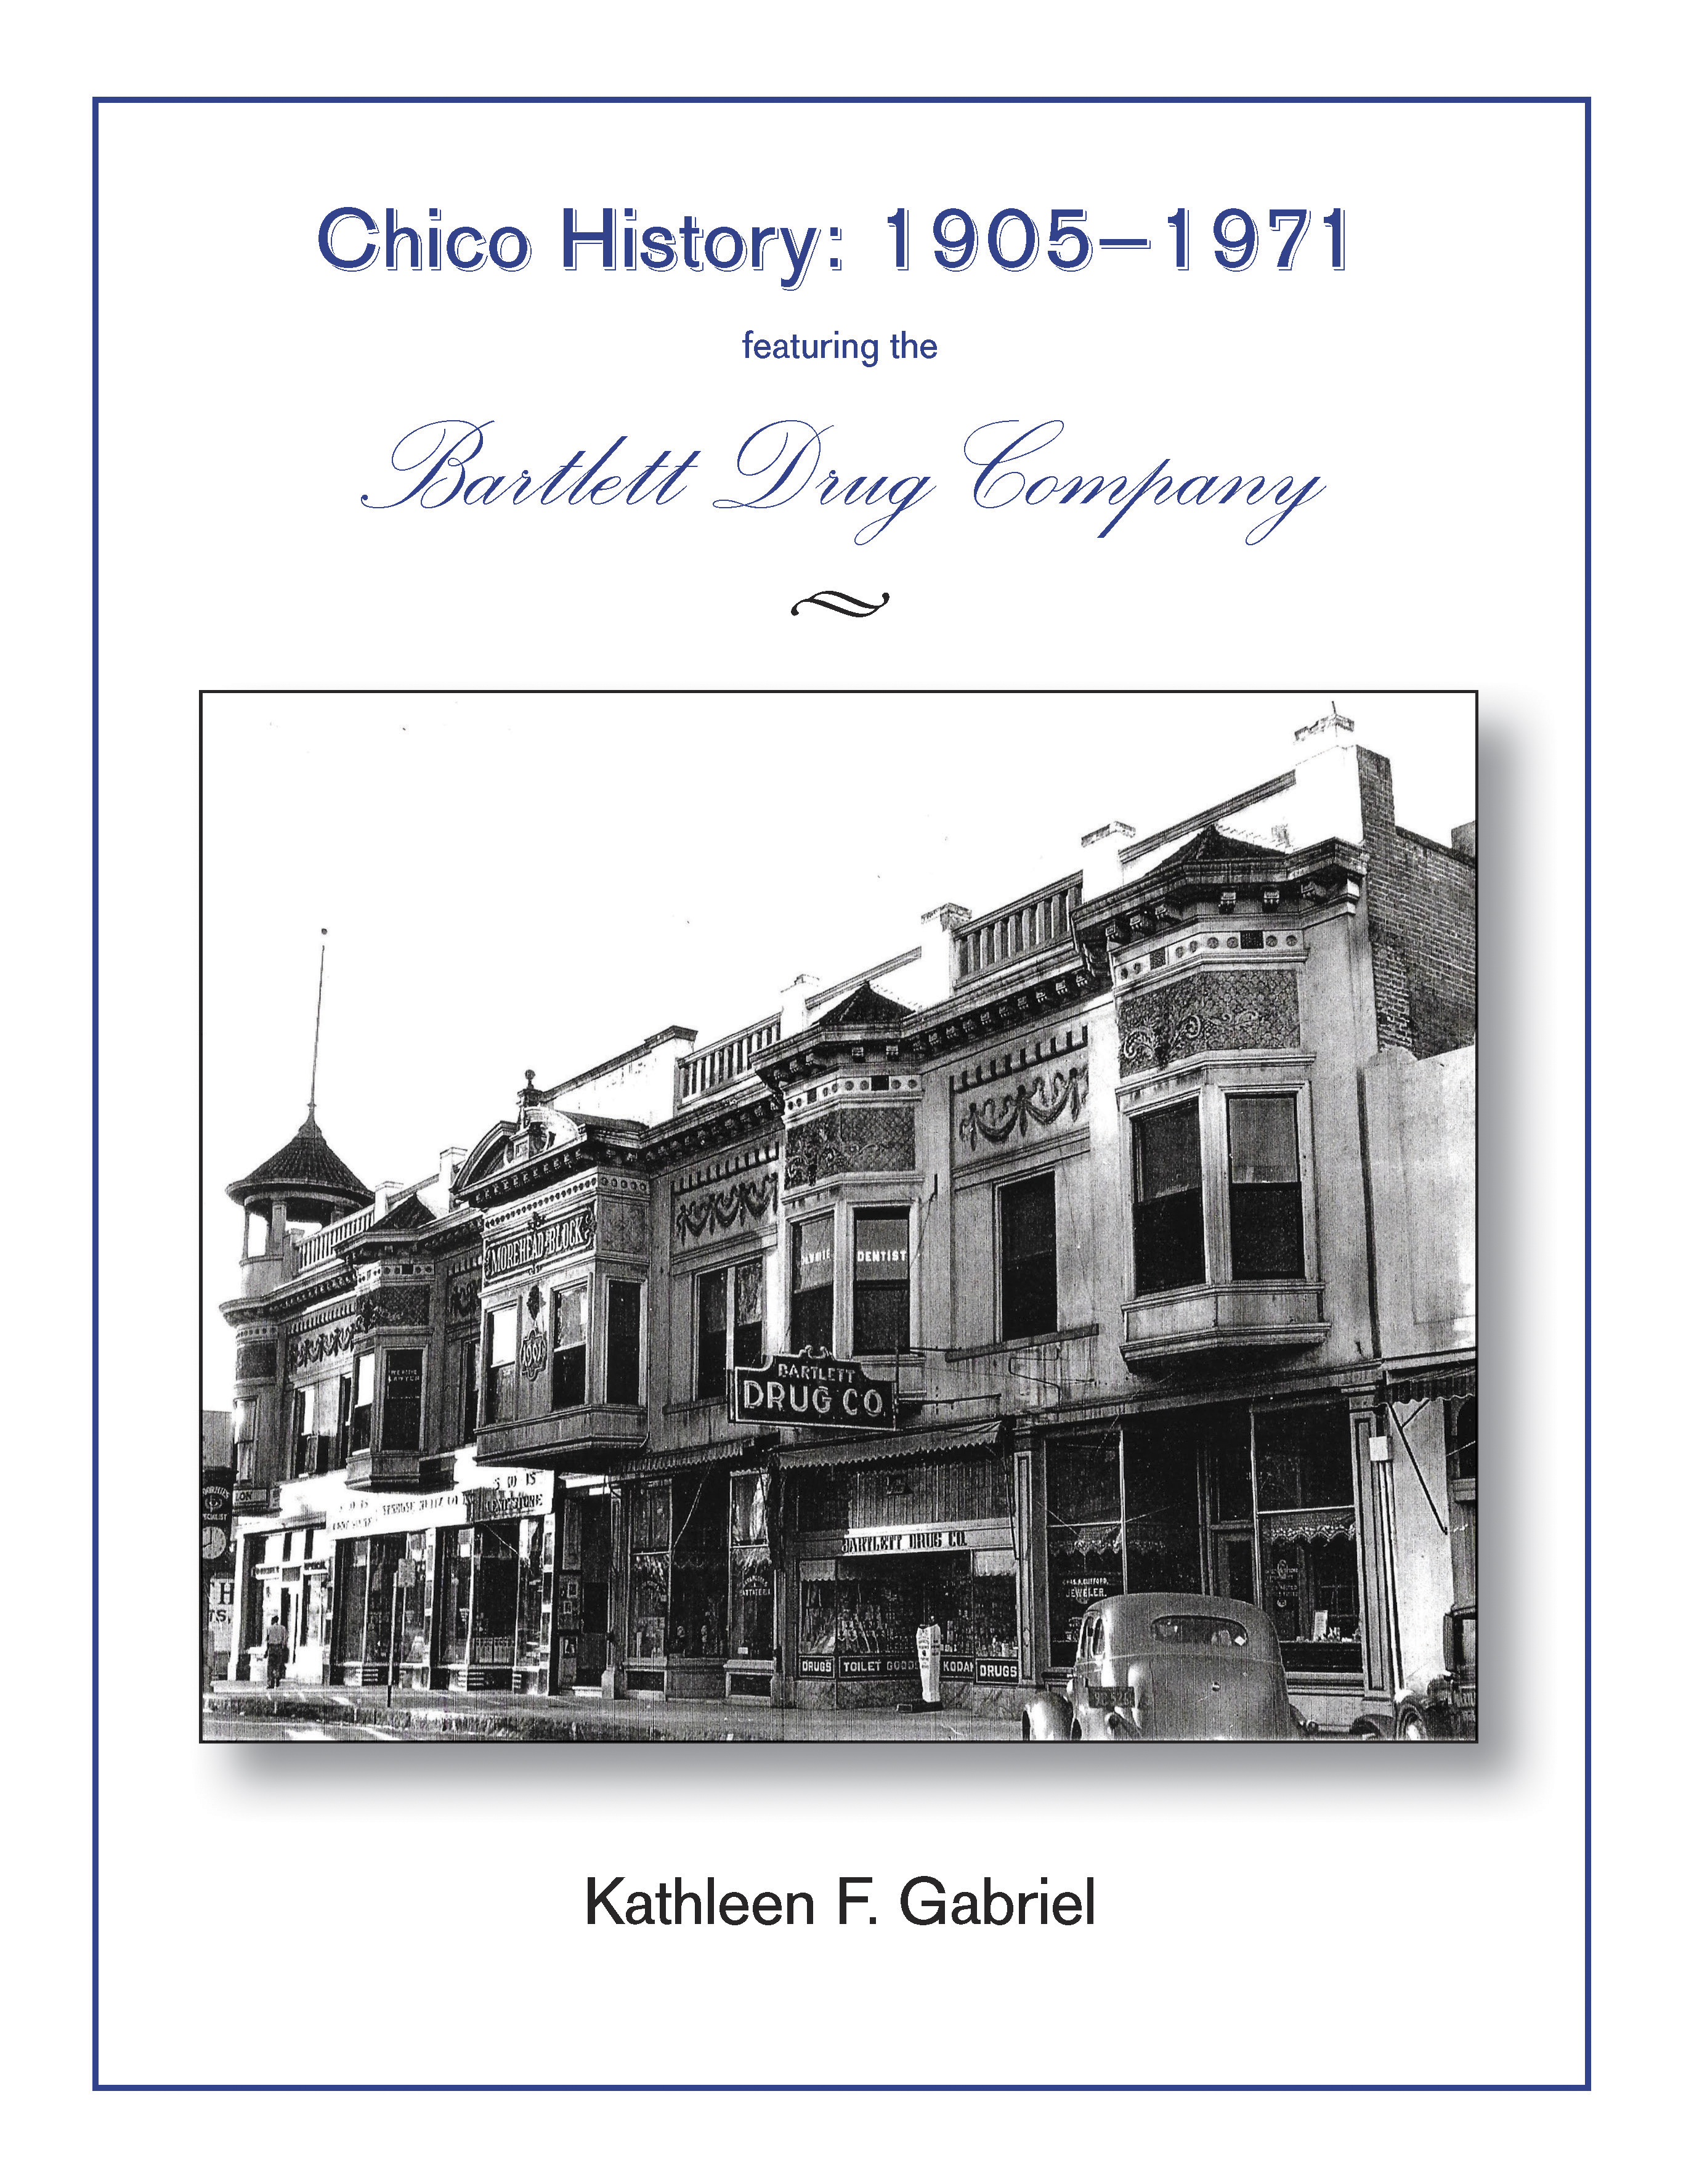 Chico History: 1905-1971 featuring the Bartlett Drug Co.